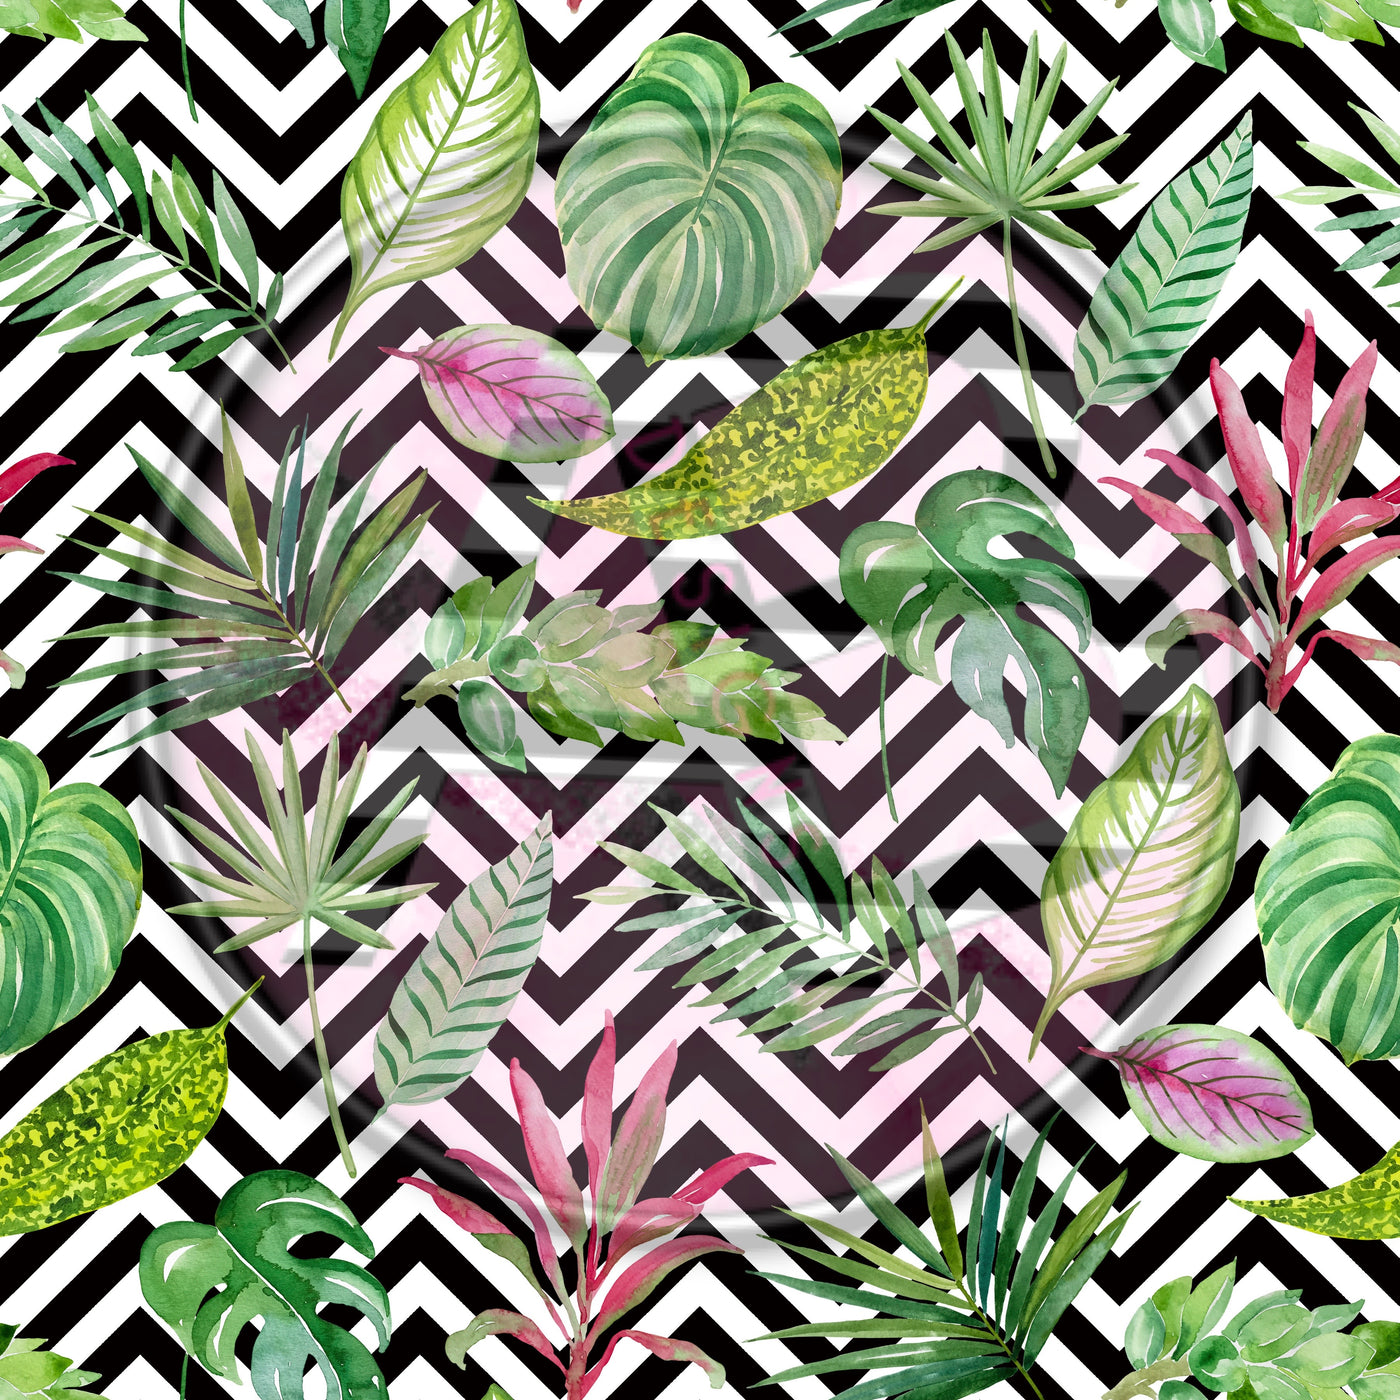 Adhesive Patterned Vinyl - Tropical 2178